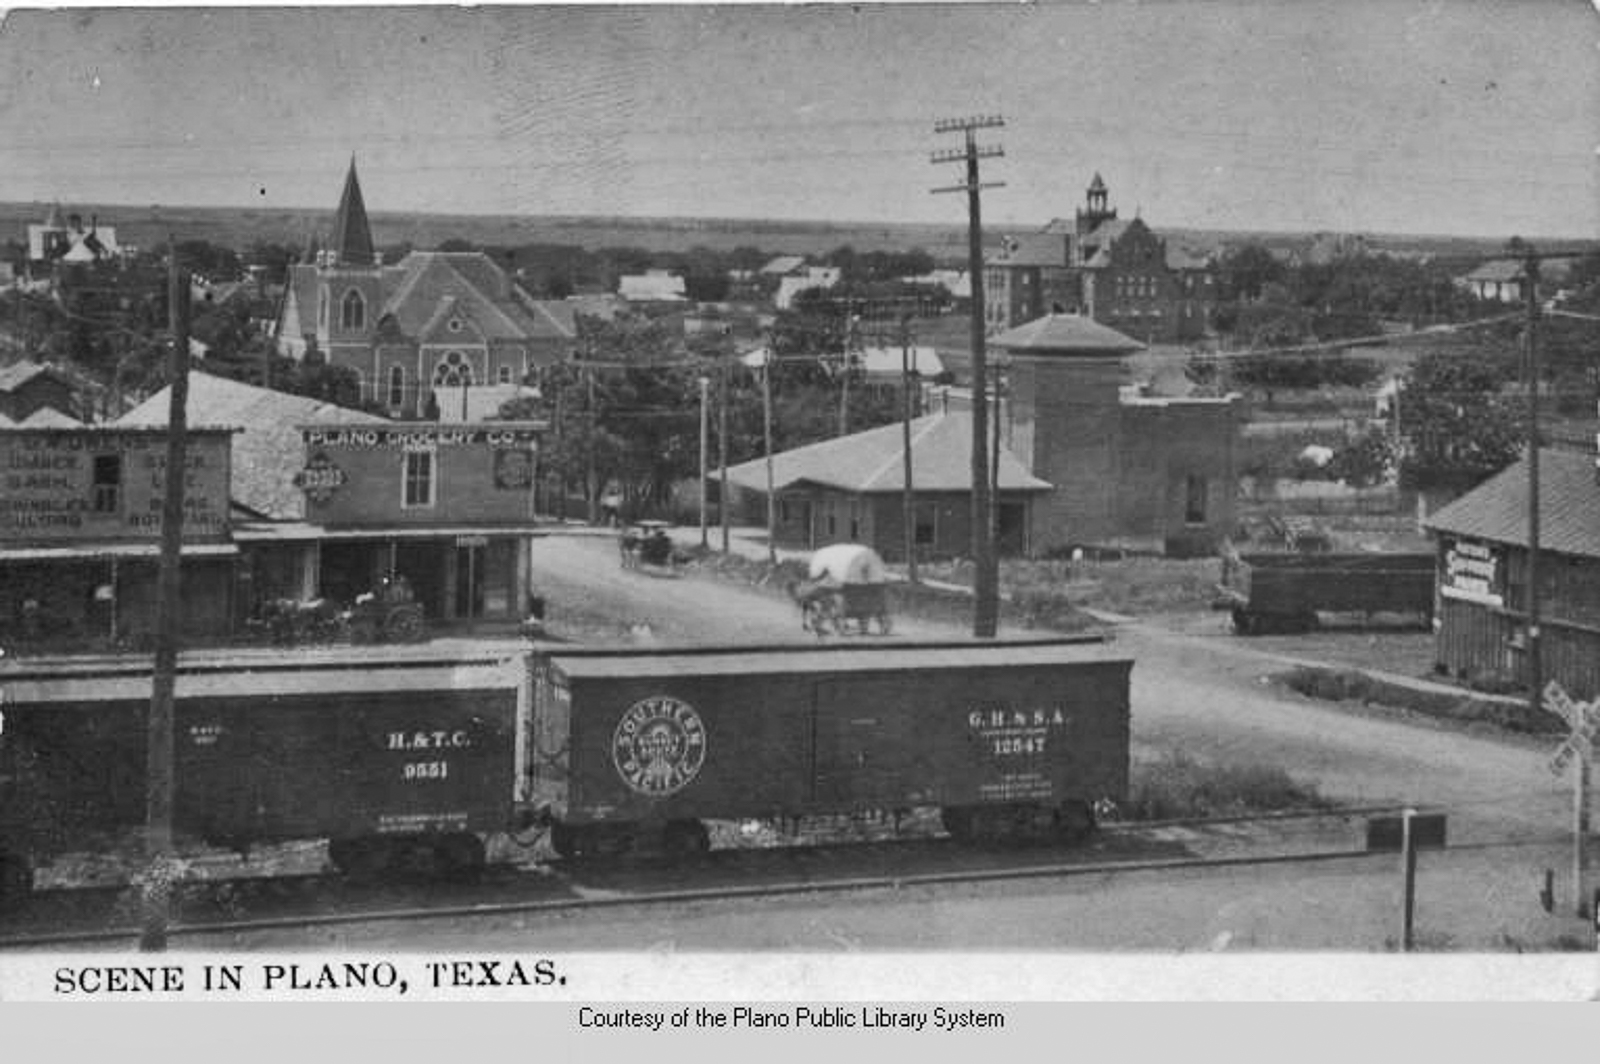 Photos provided by Plano Public Library